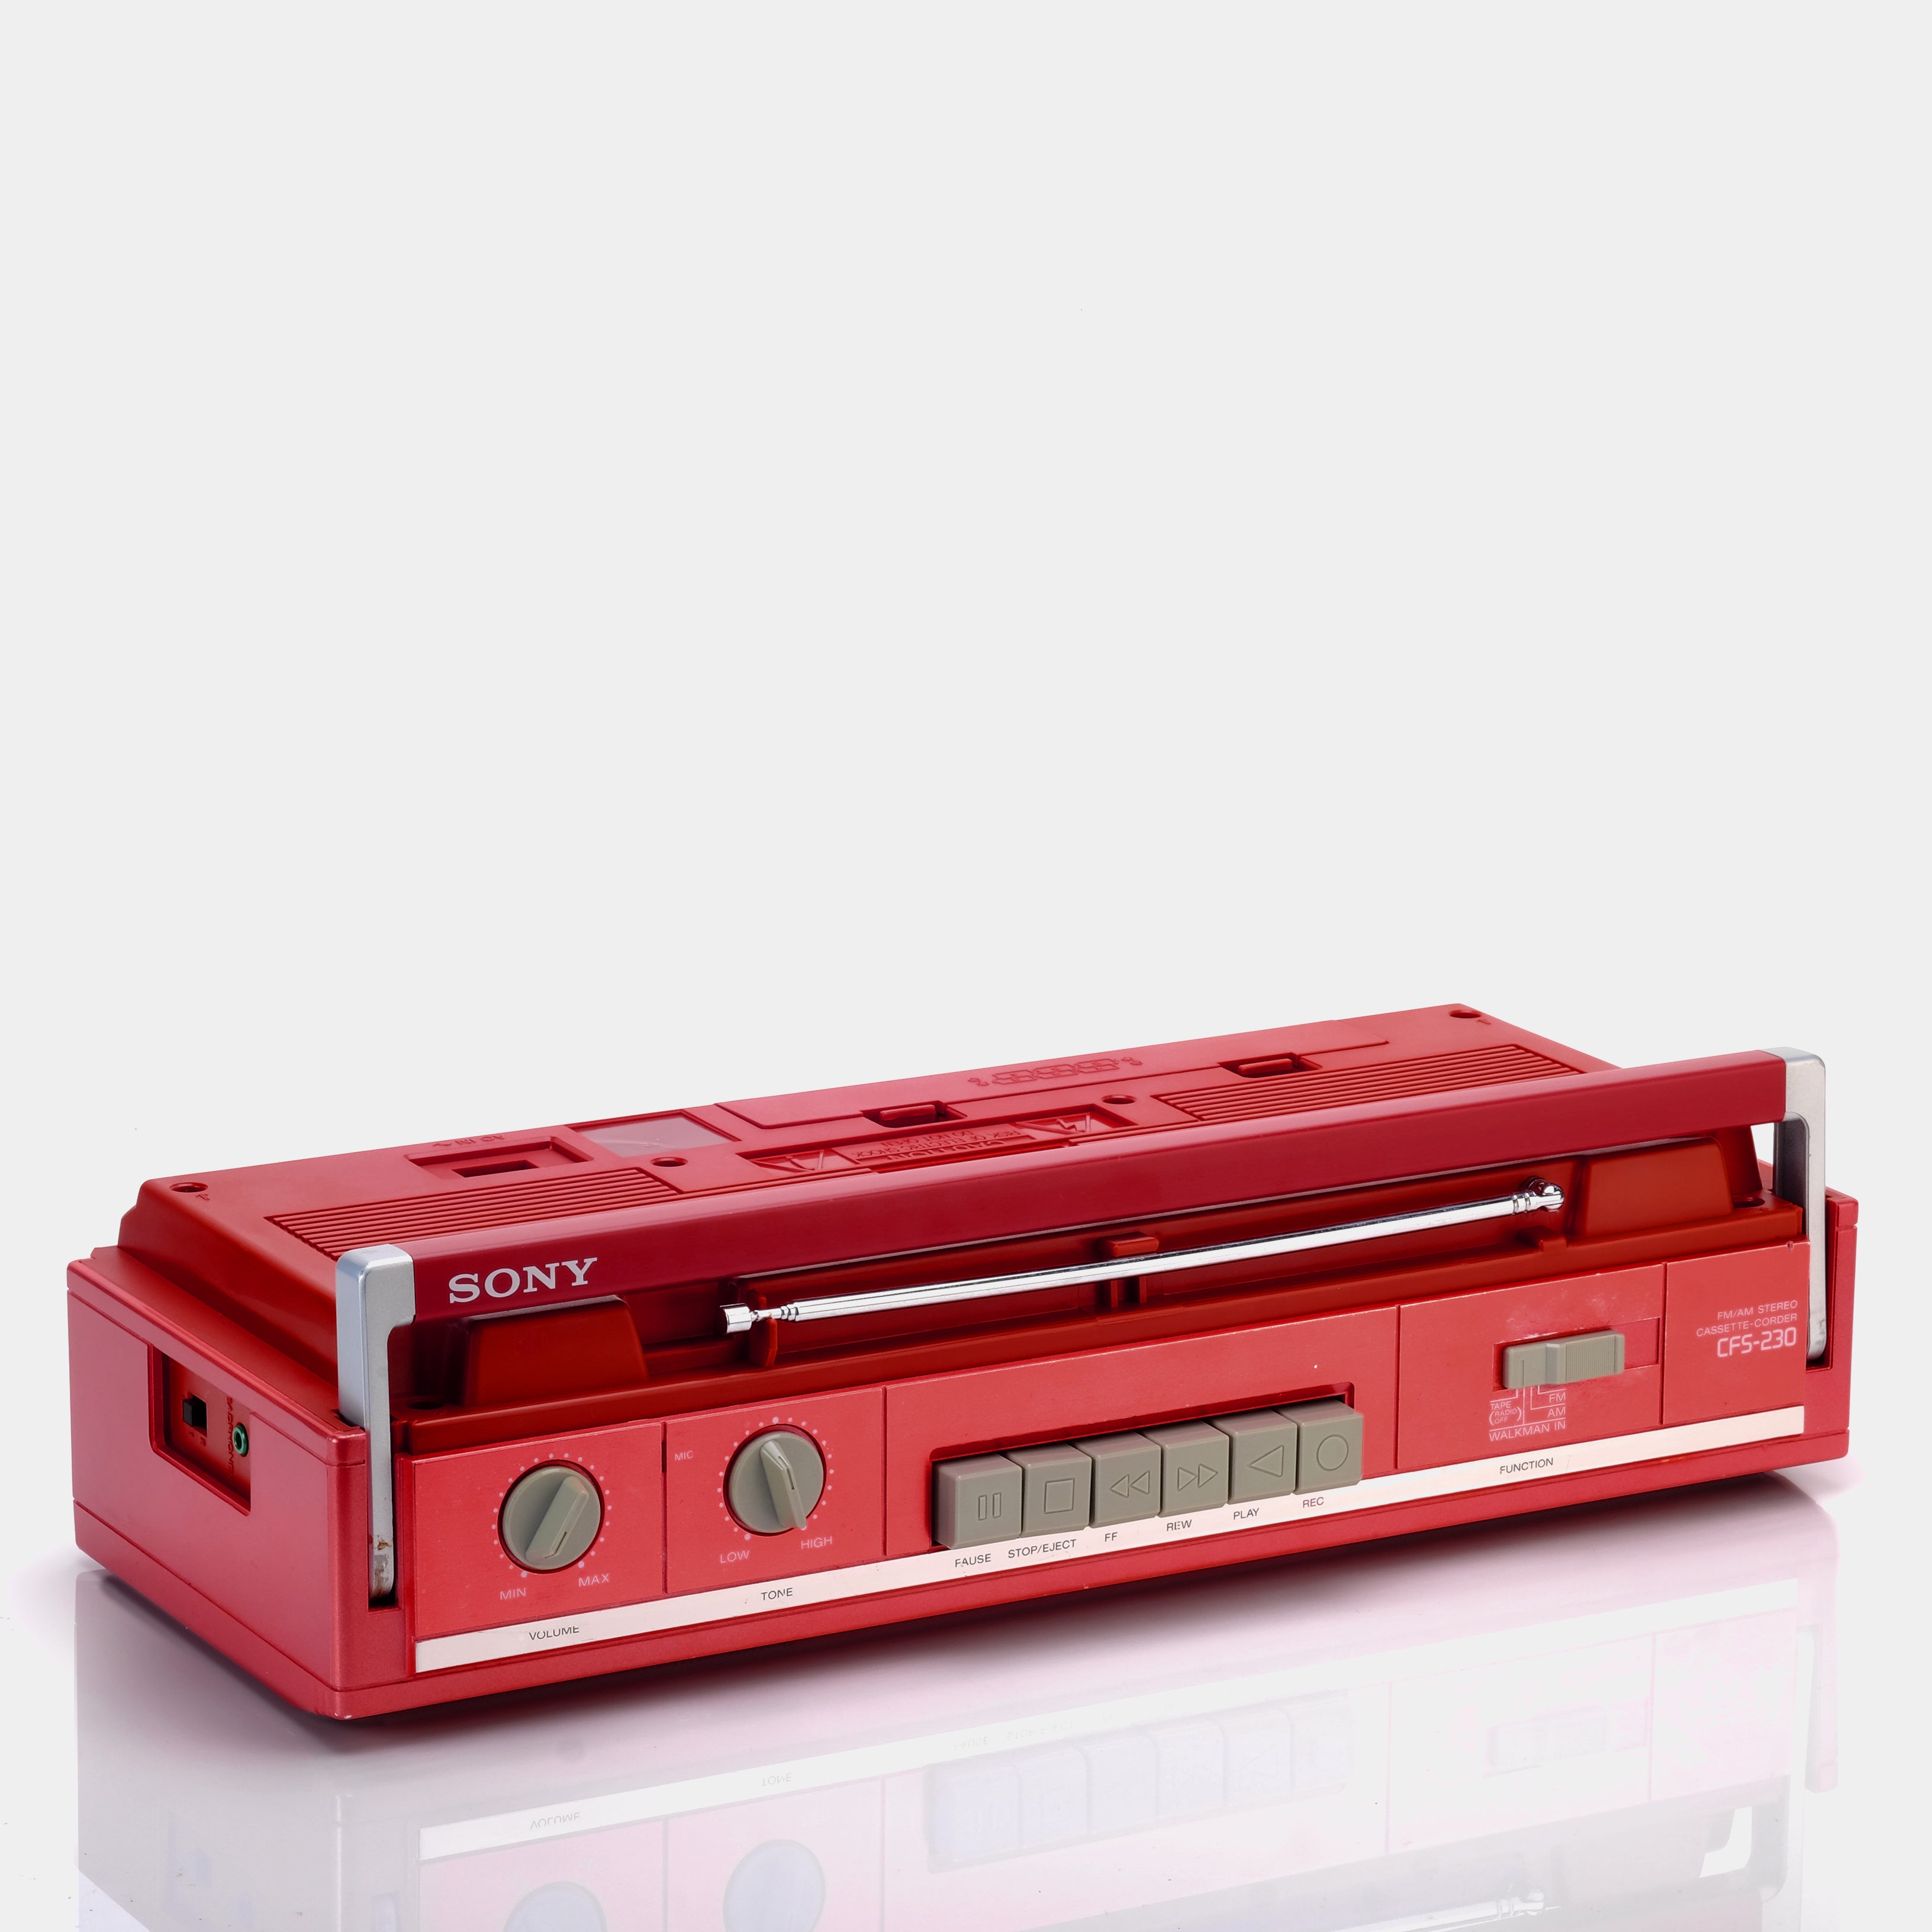 Sony CFS-230 Red Boombox Cassette Player